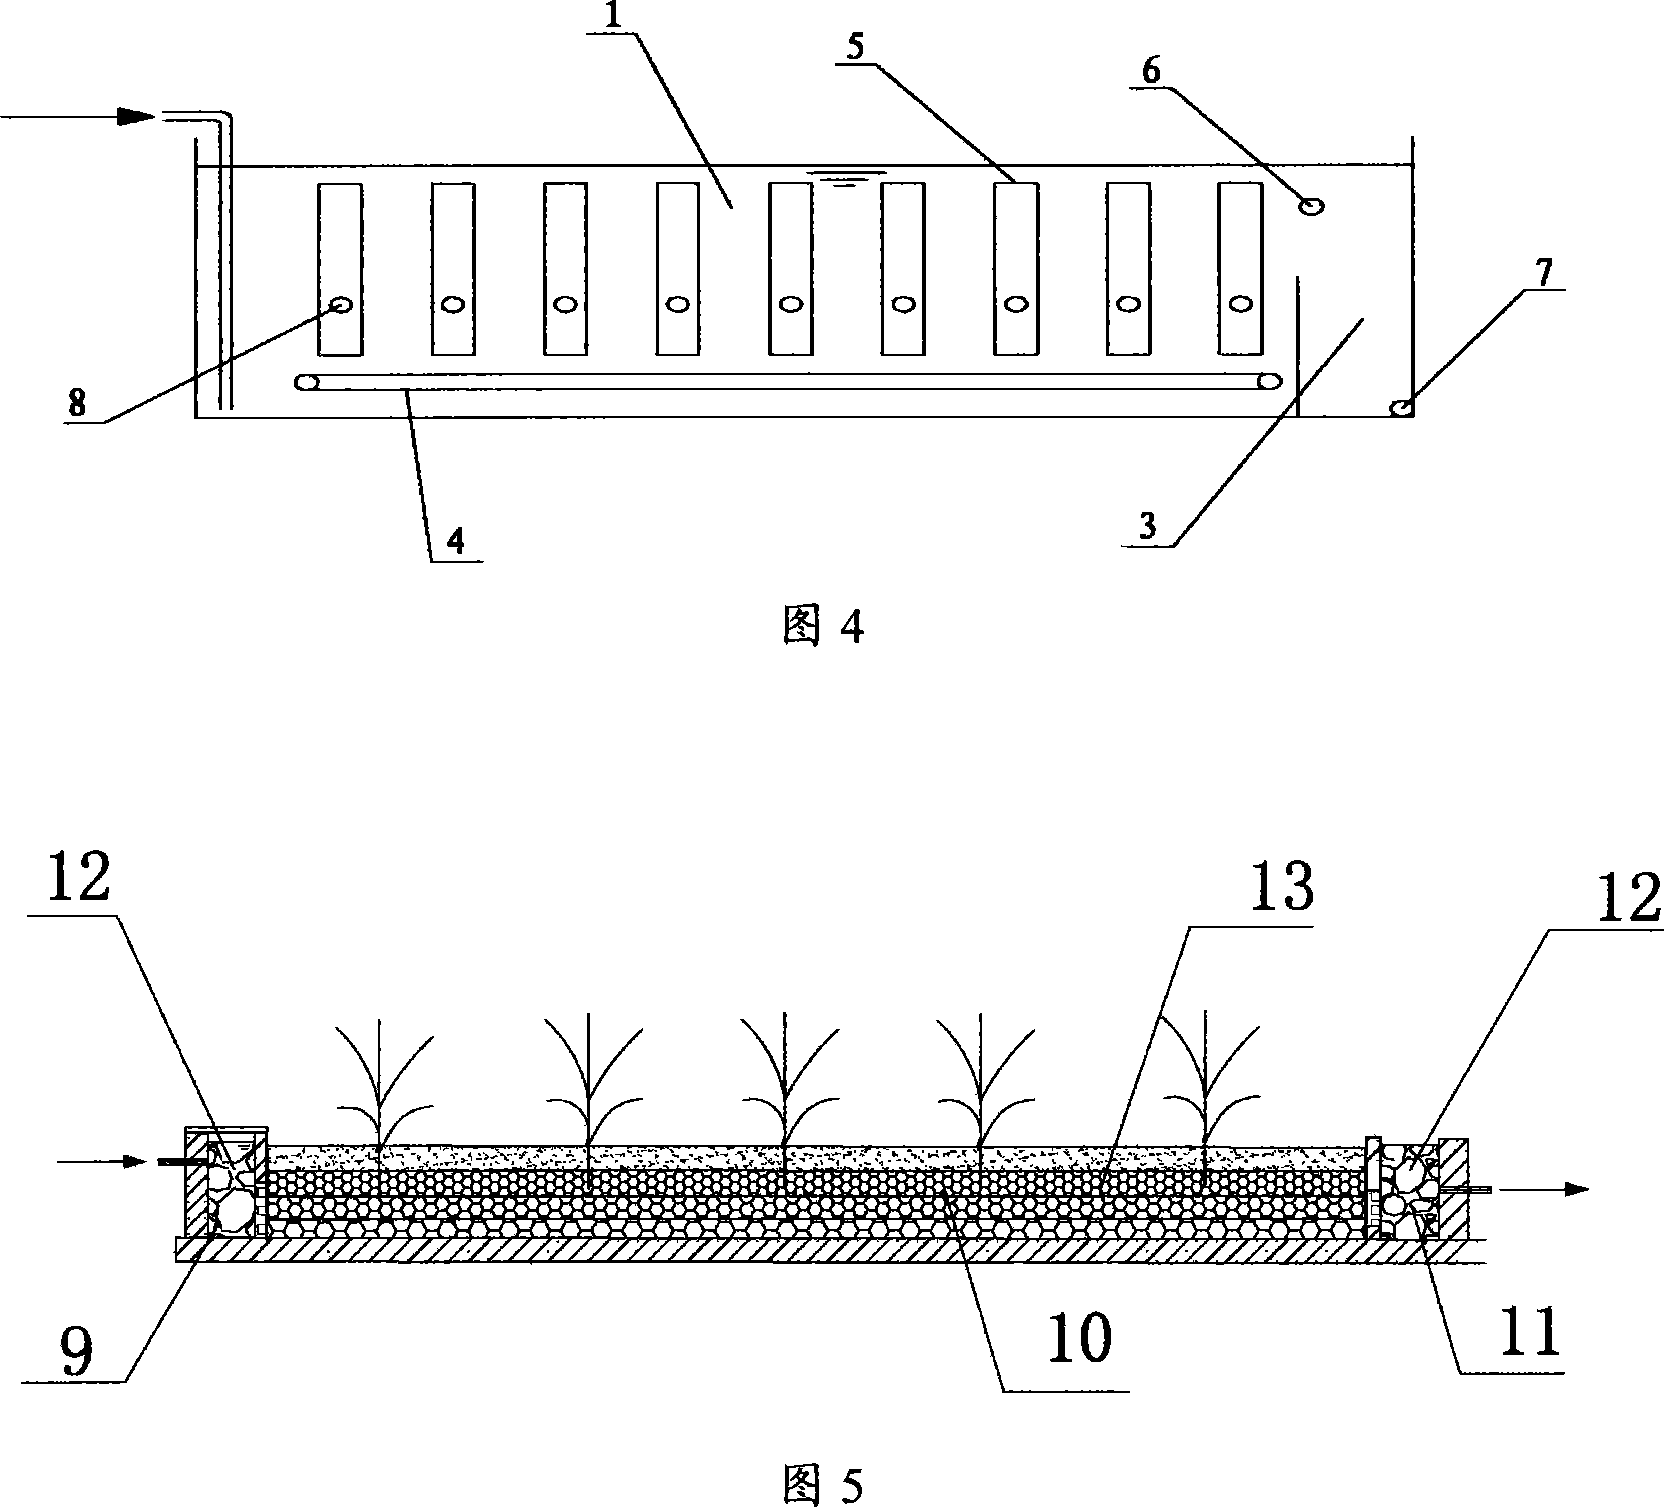 High road service area sewage water treating process and dynamic membrane bioreactor